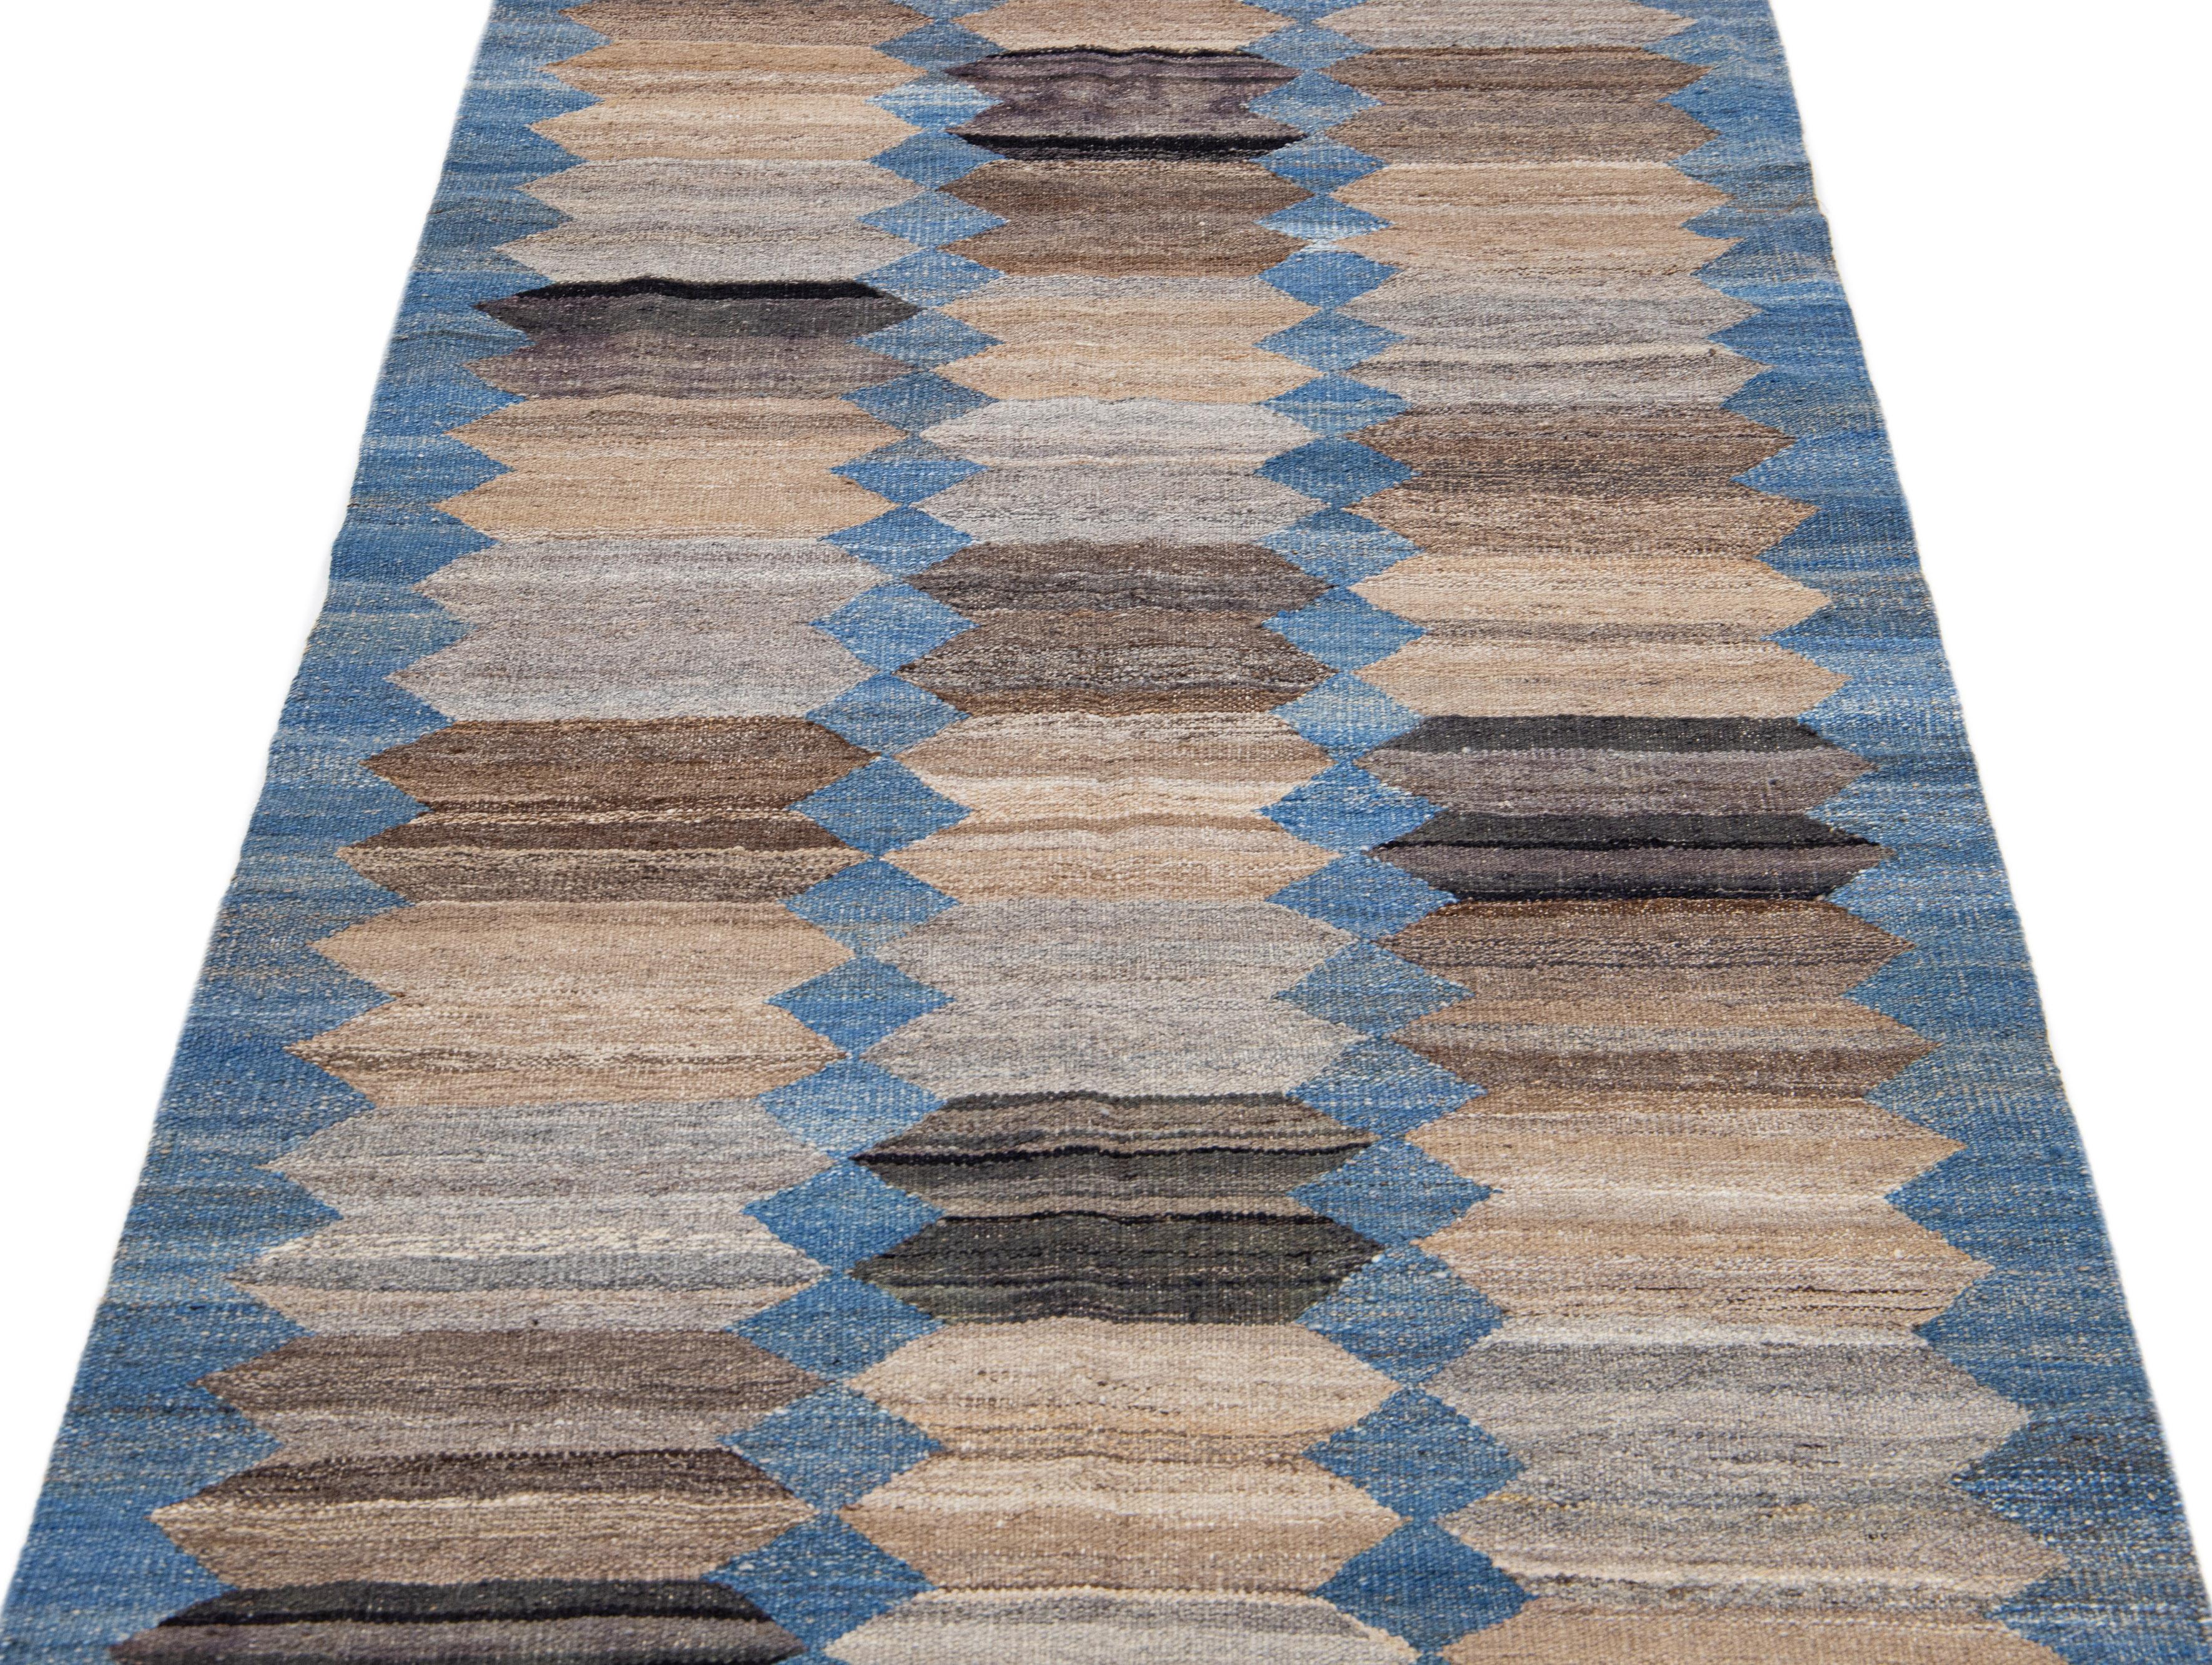 This Deco flatweave wool runner exhibits a captivating blue field with brown and beige accents, creating a contemporary and aesthetically-pleasing abstract design. The natural material of the Deco wool rug is designed for comfort and long-lasting